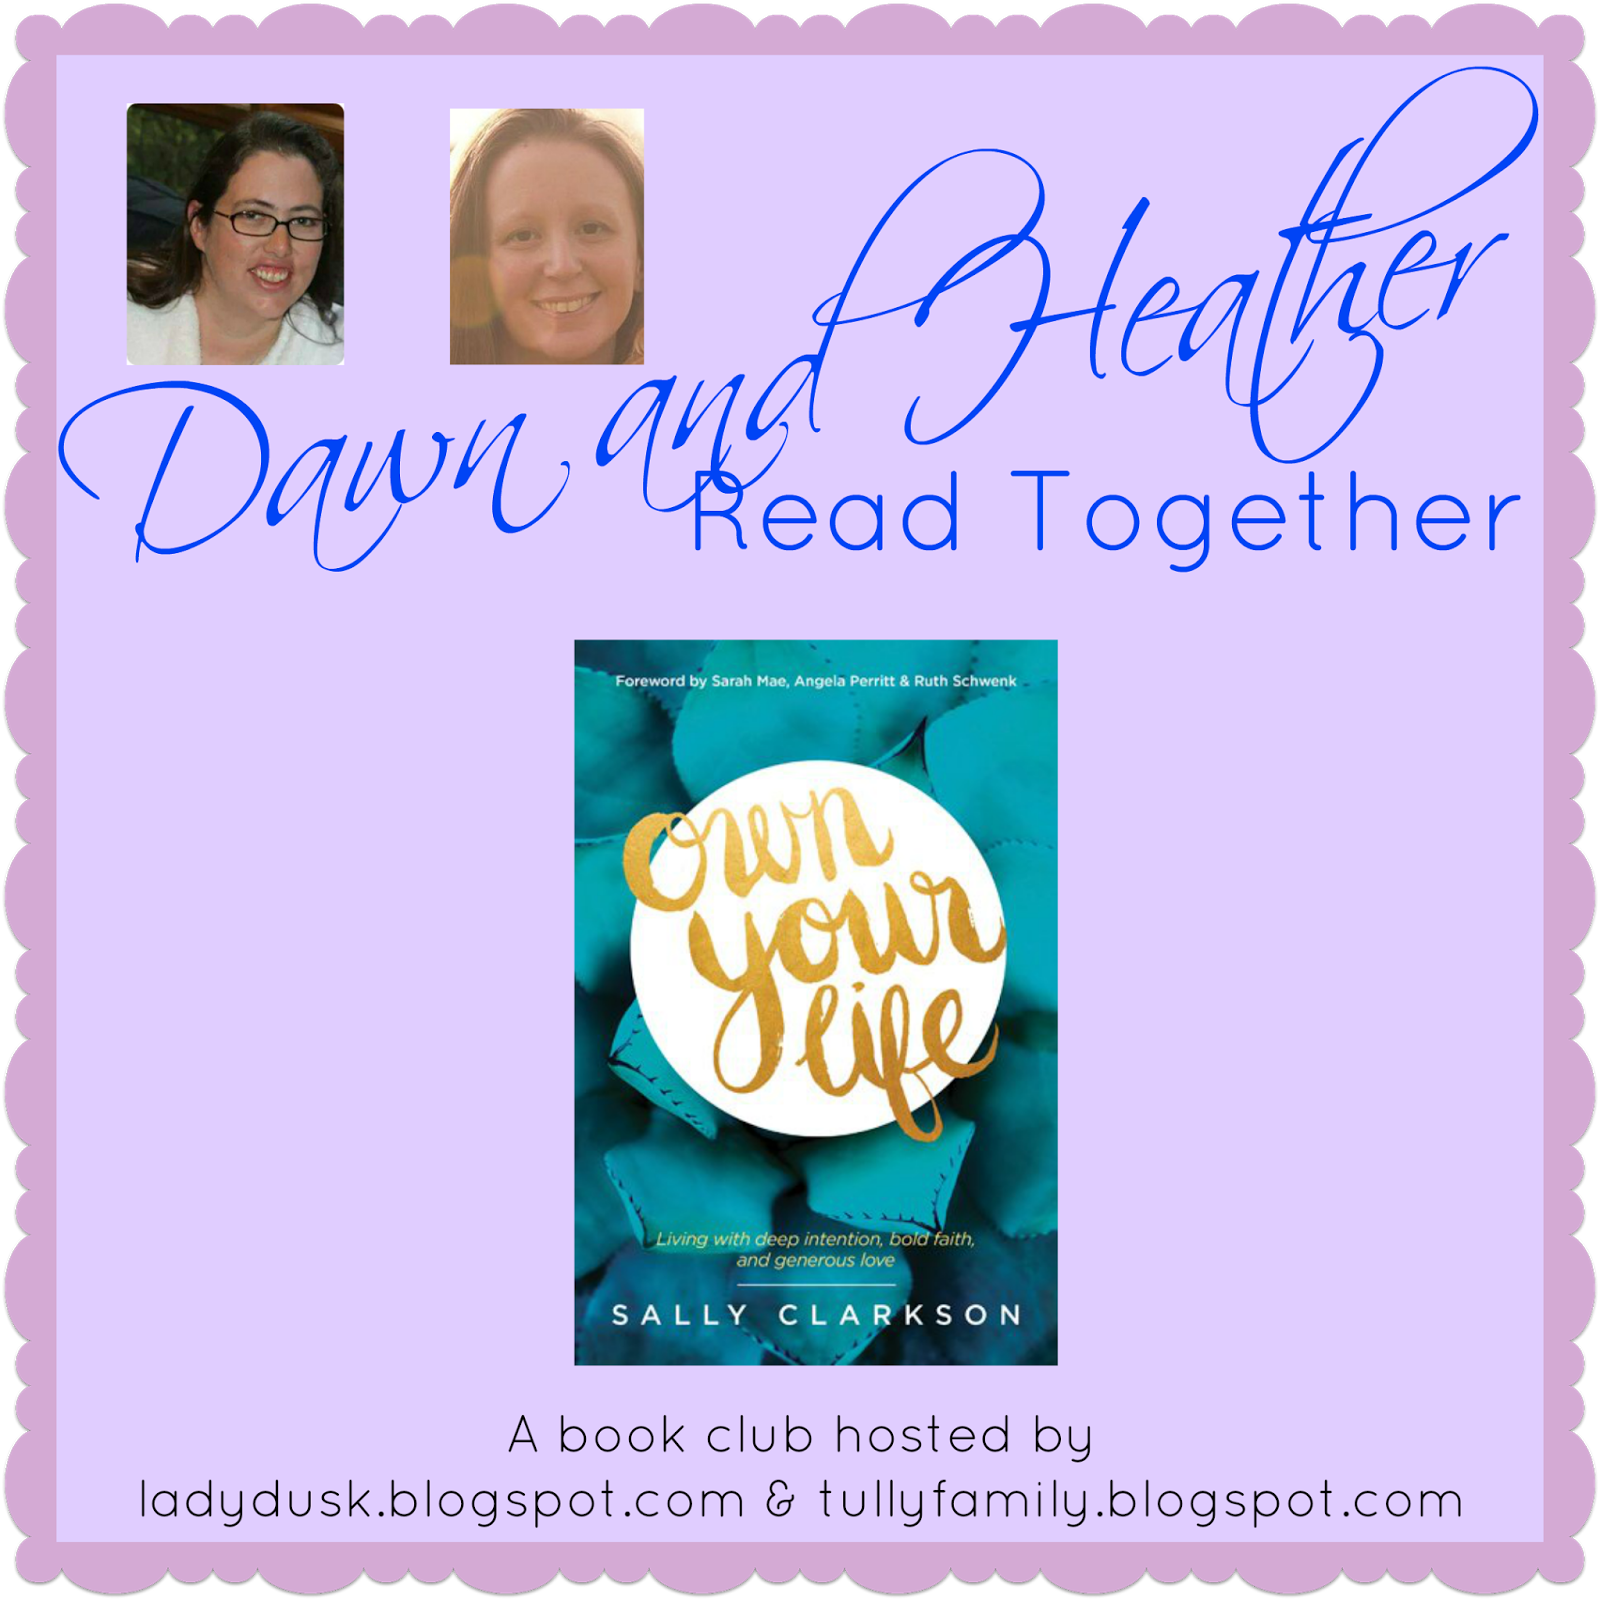 Dawn and Heather Read Together: Own Your Life, Chapters 6-9